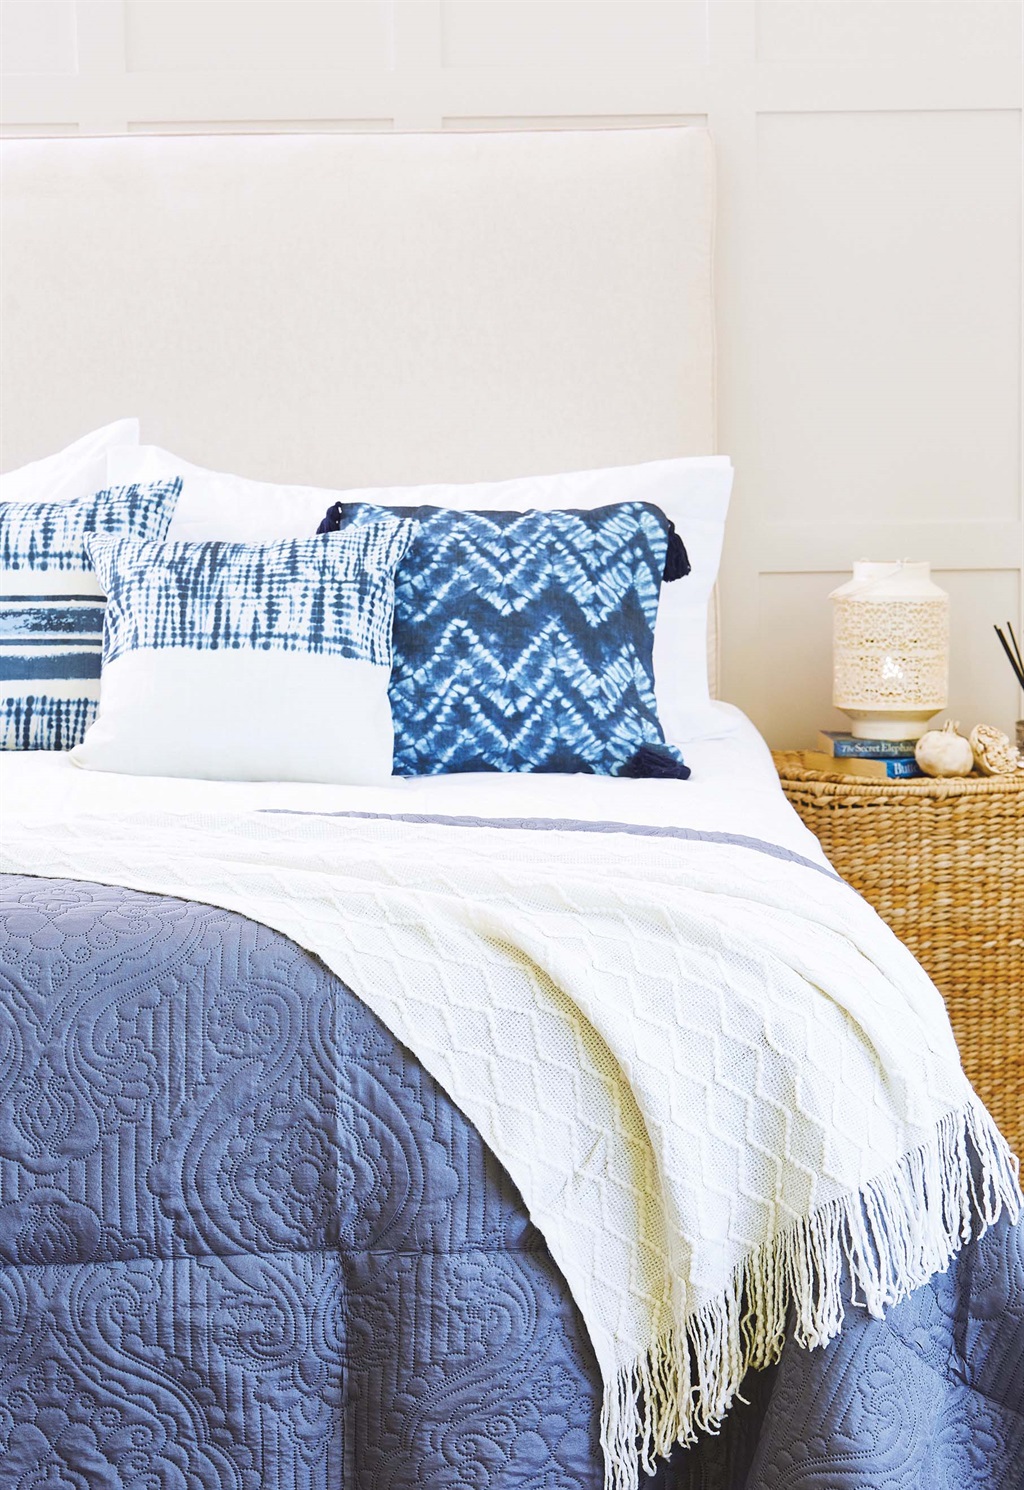 GET THE LOOK - White, neutrals and calming blues create the perfect bedroom retreat. The use of different textures and materials adds interest and warmth. The tie-dye printed scatter covers (45 x 45cm; R120 each) come in three designs.